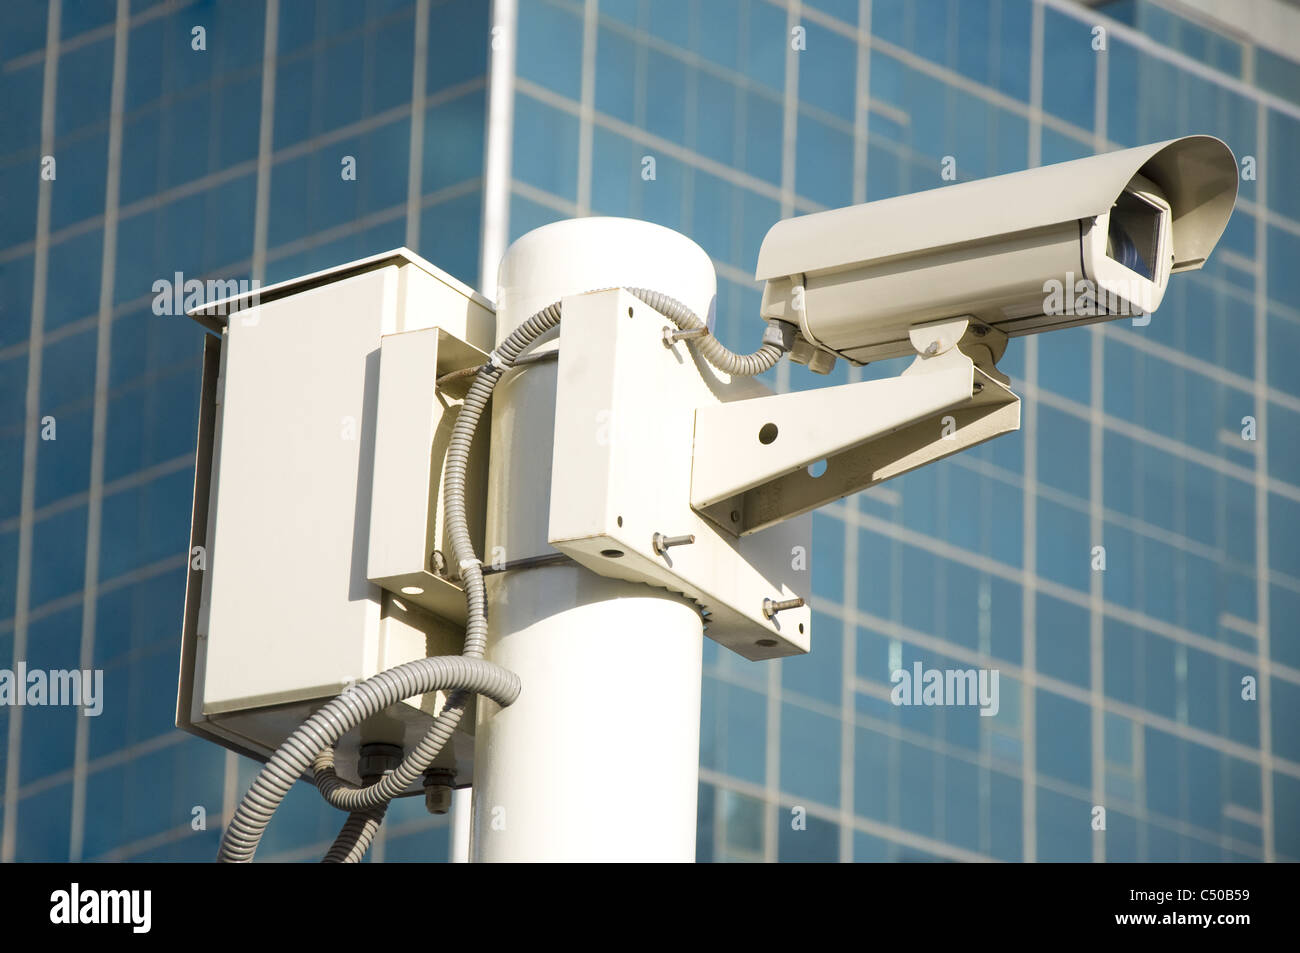 Independent security cameras in the city Stock Photo